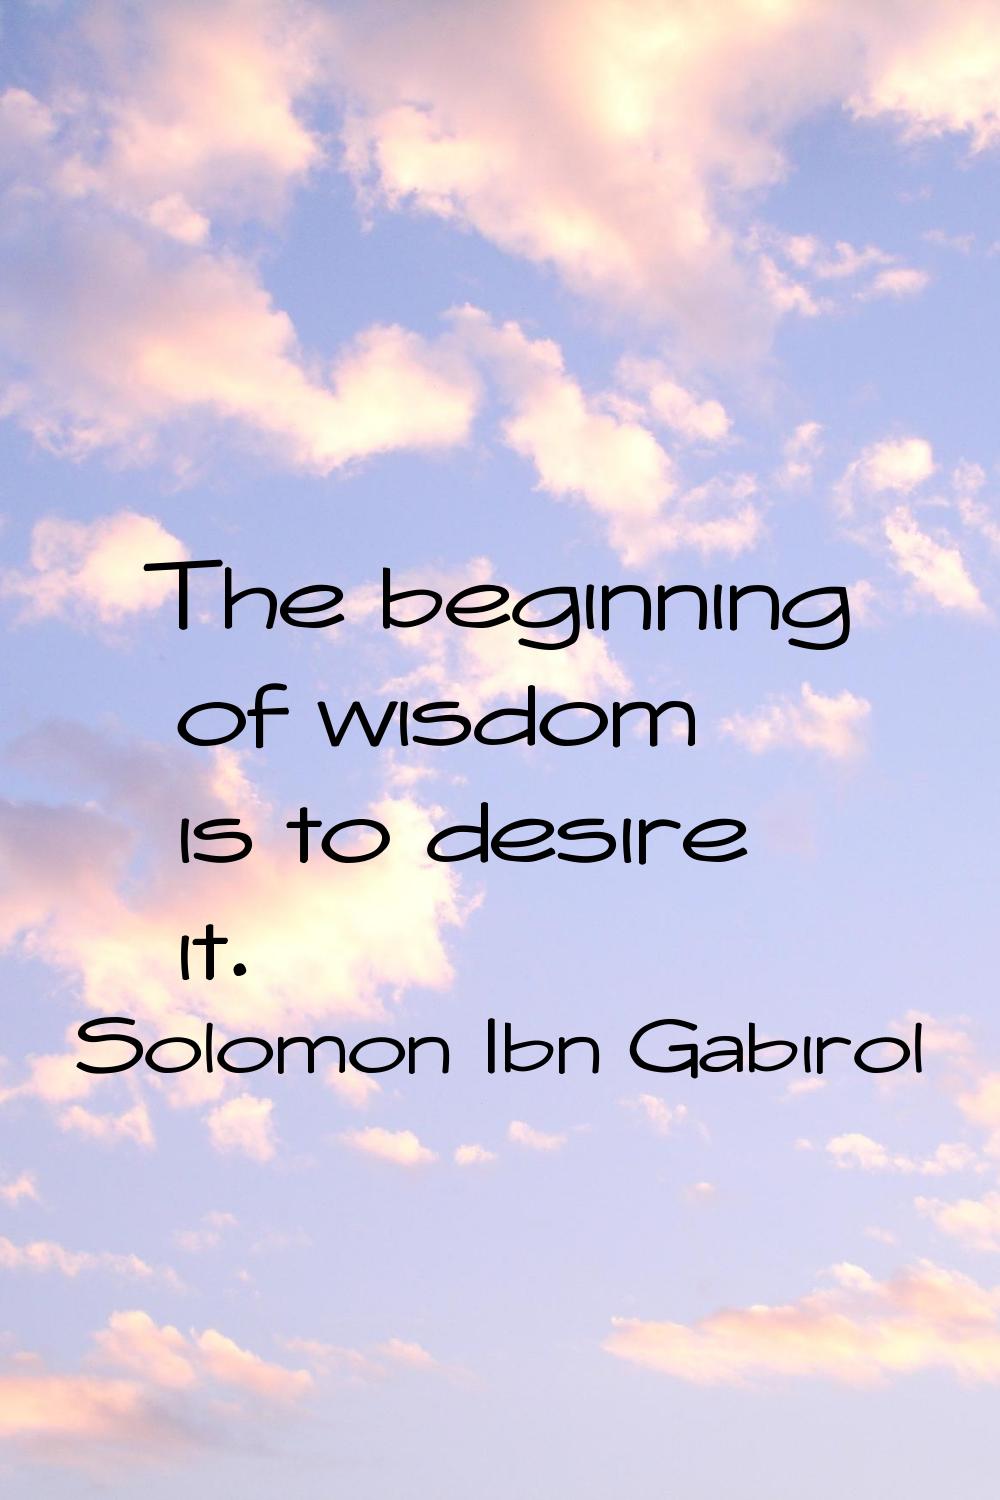 The beginning of wisdom is to desire it.